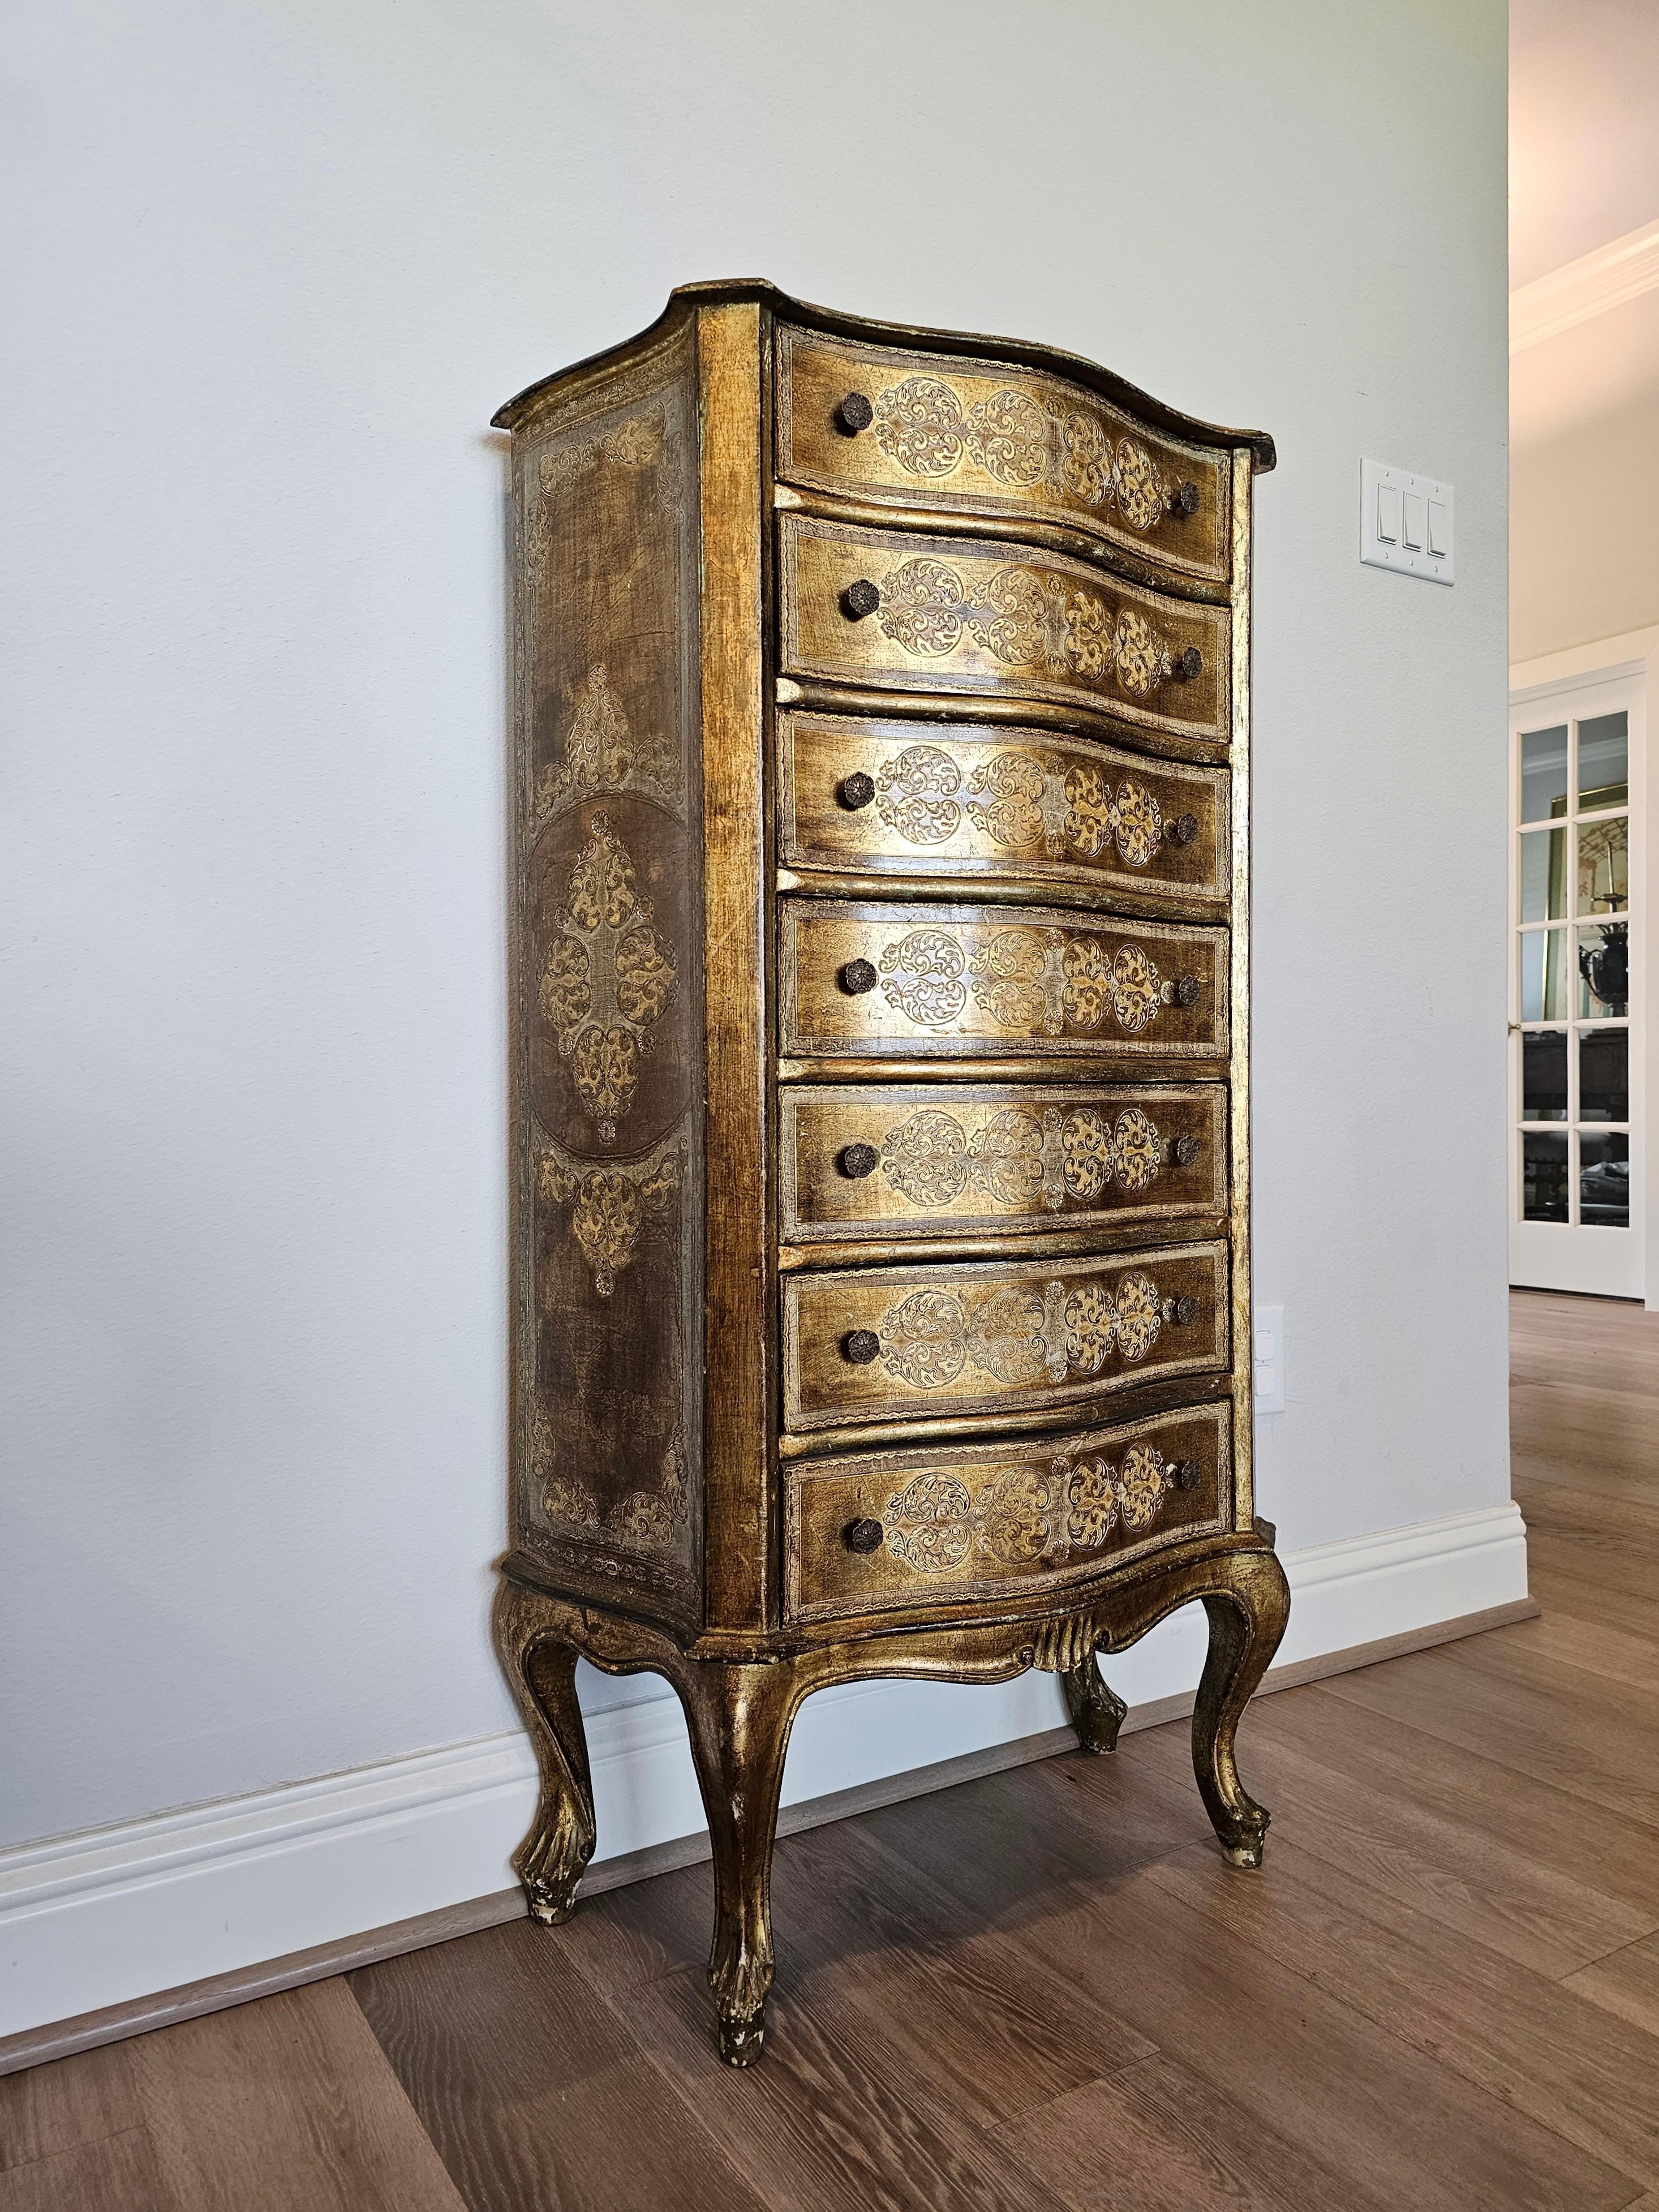 A stunning Italian midcentury hand decorated tall chest of drawers - lingerie semainier. circa 1940

Handcrafted in the Florence region of Central Italy in the mid-20th century, the curvacious serpatine-shaped solid wood case finished in opulent